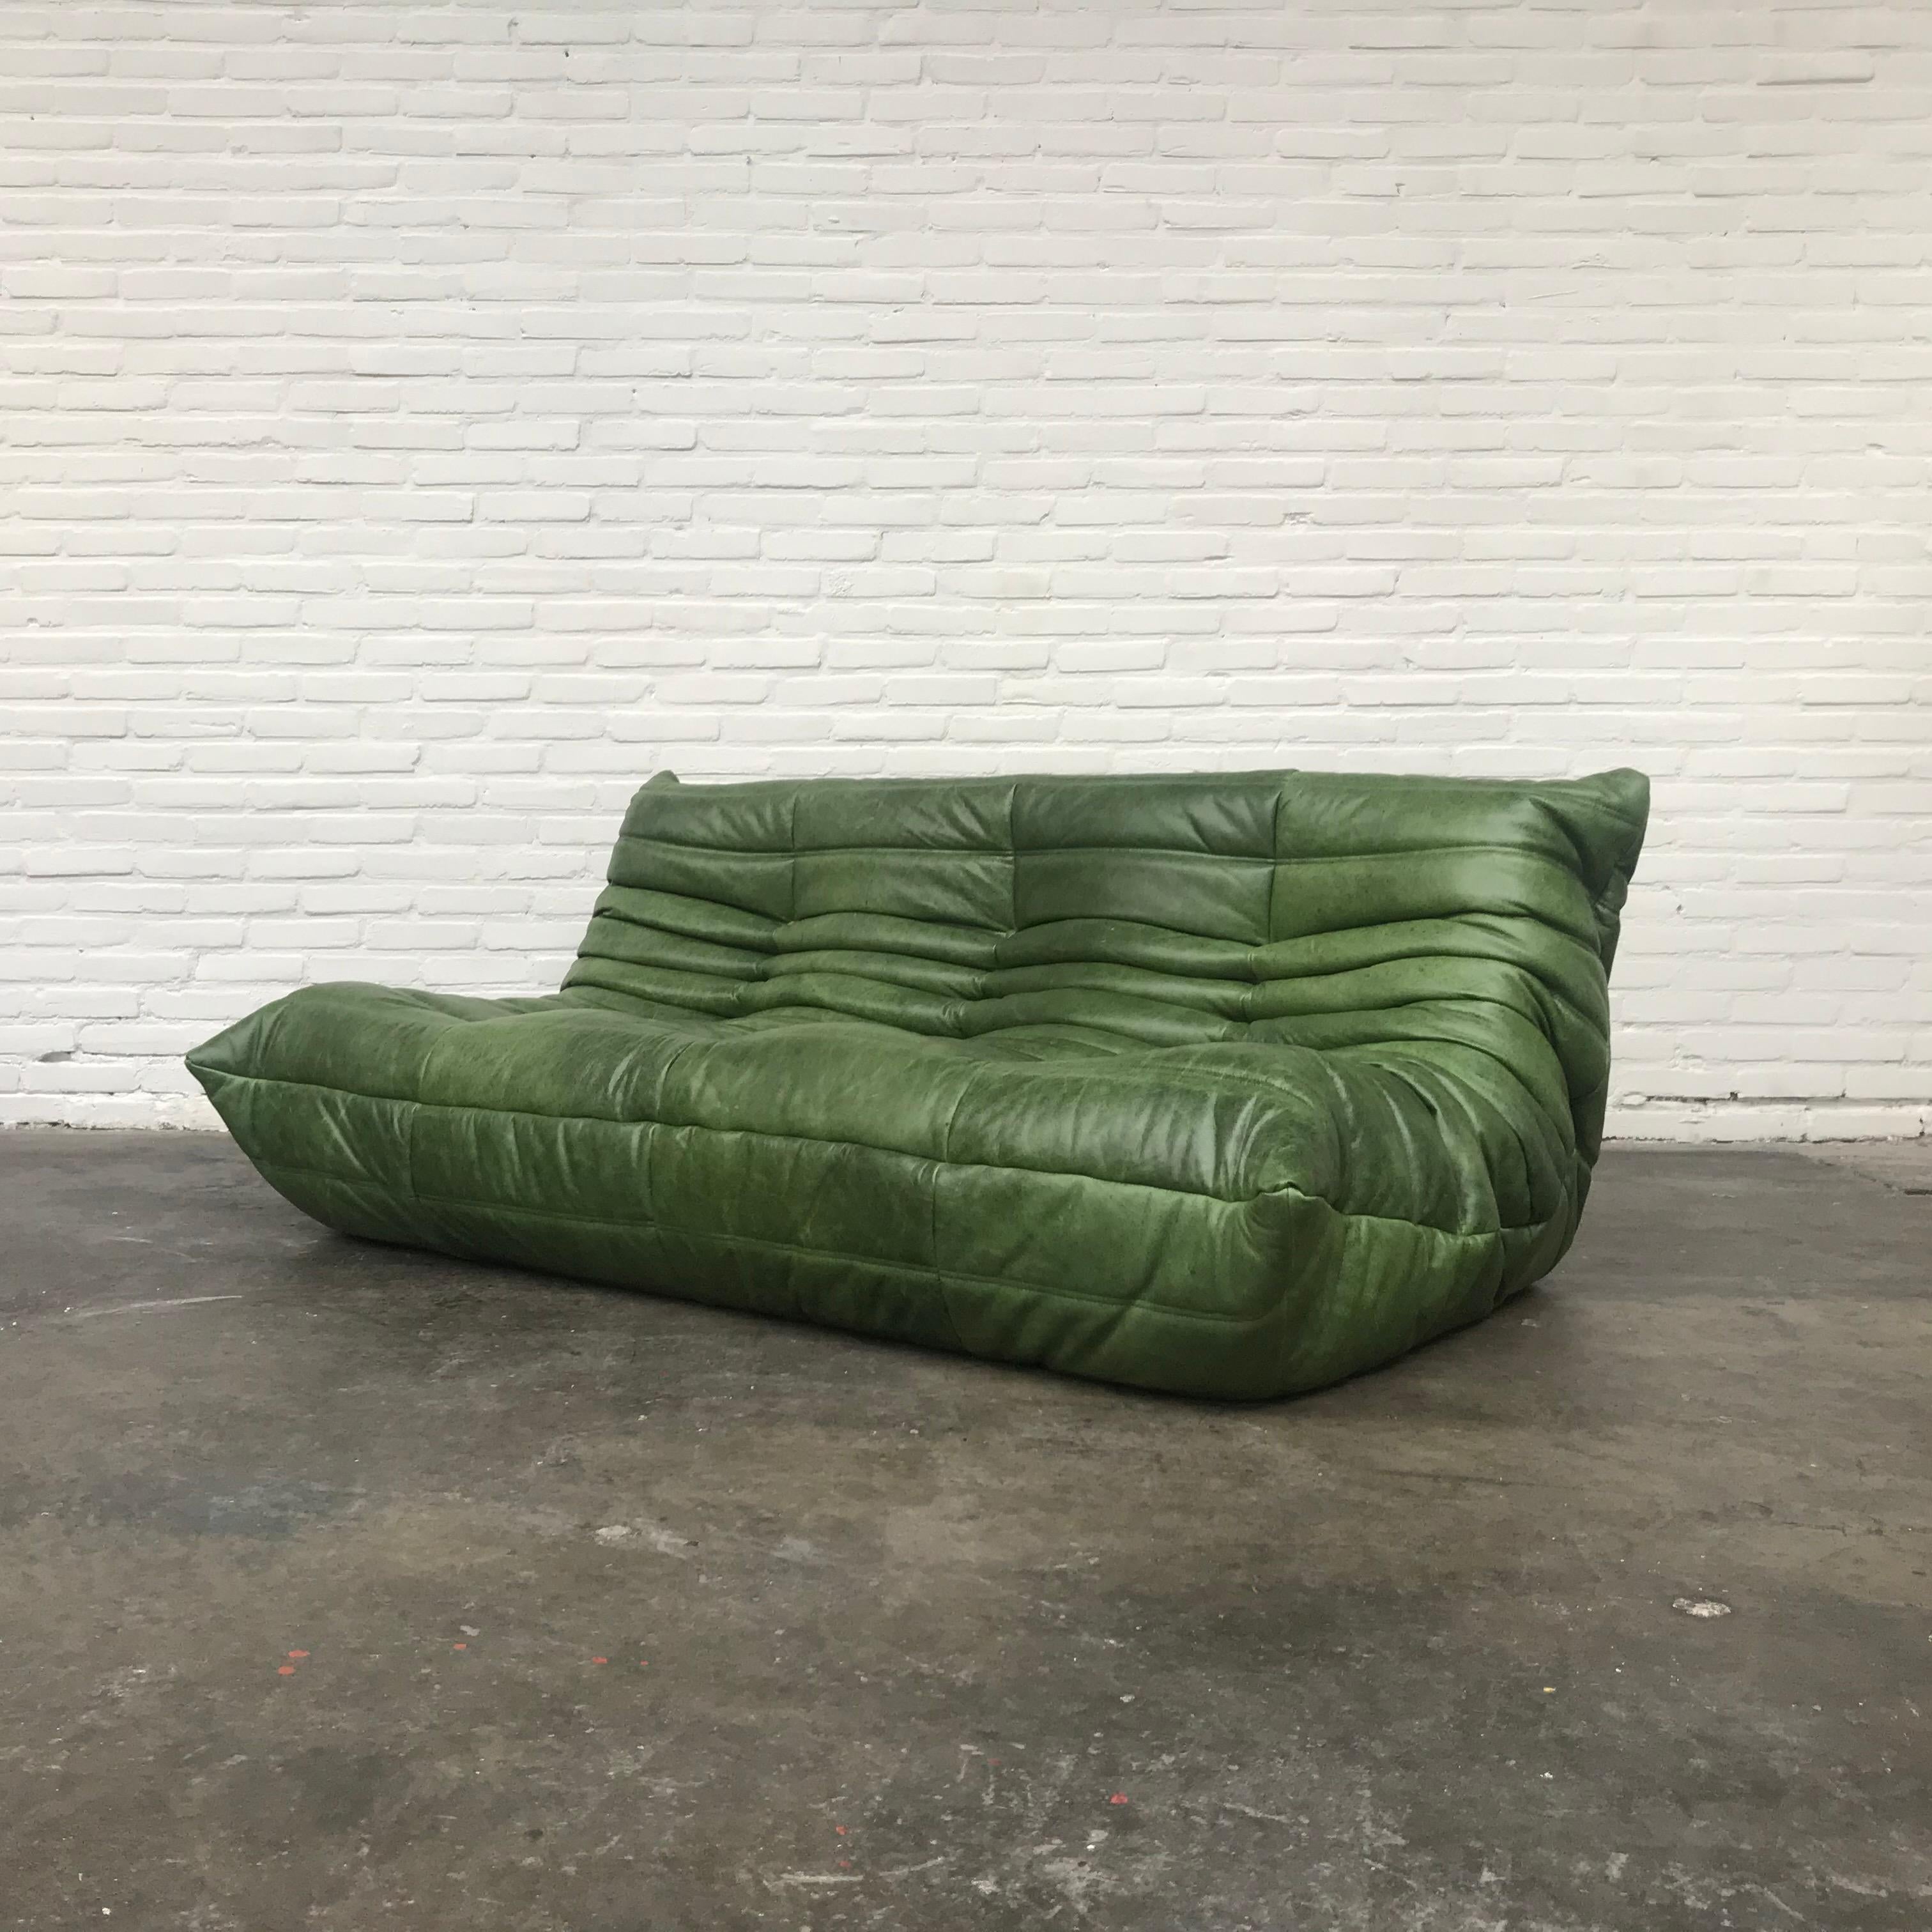 The Togo designer Classic was designed in France by Michel Ducaroy in 1974. This piece is restored and newly upholstered in fine Italian green leather. Upon agreement with Ligne Roset the label is not reaffixed.

 